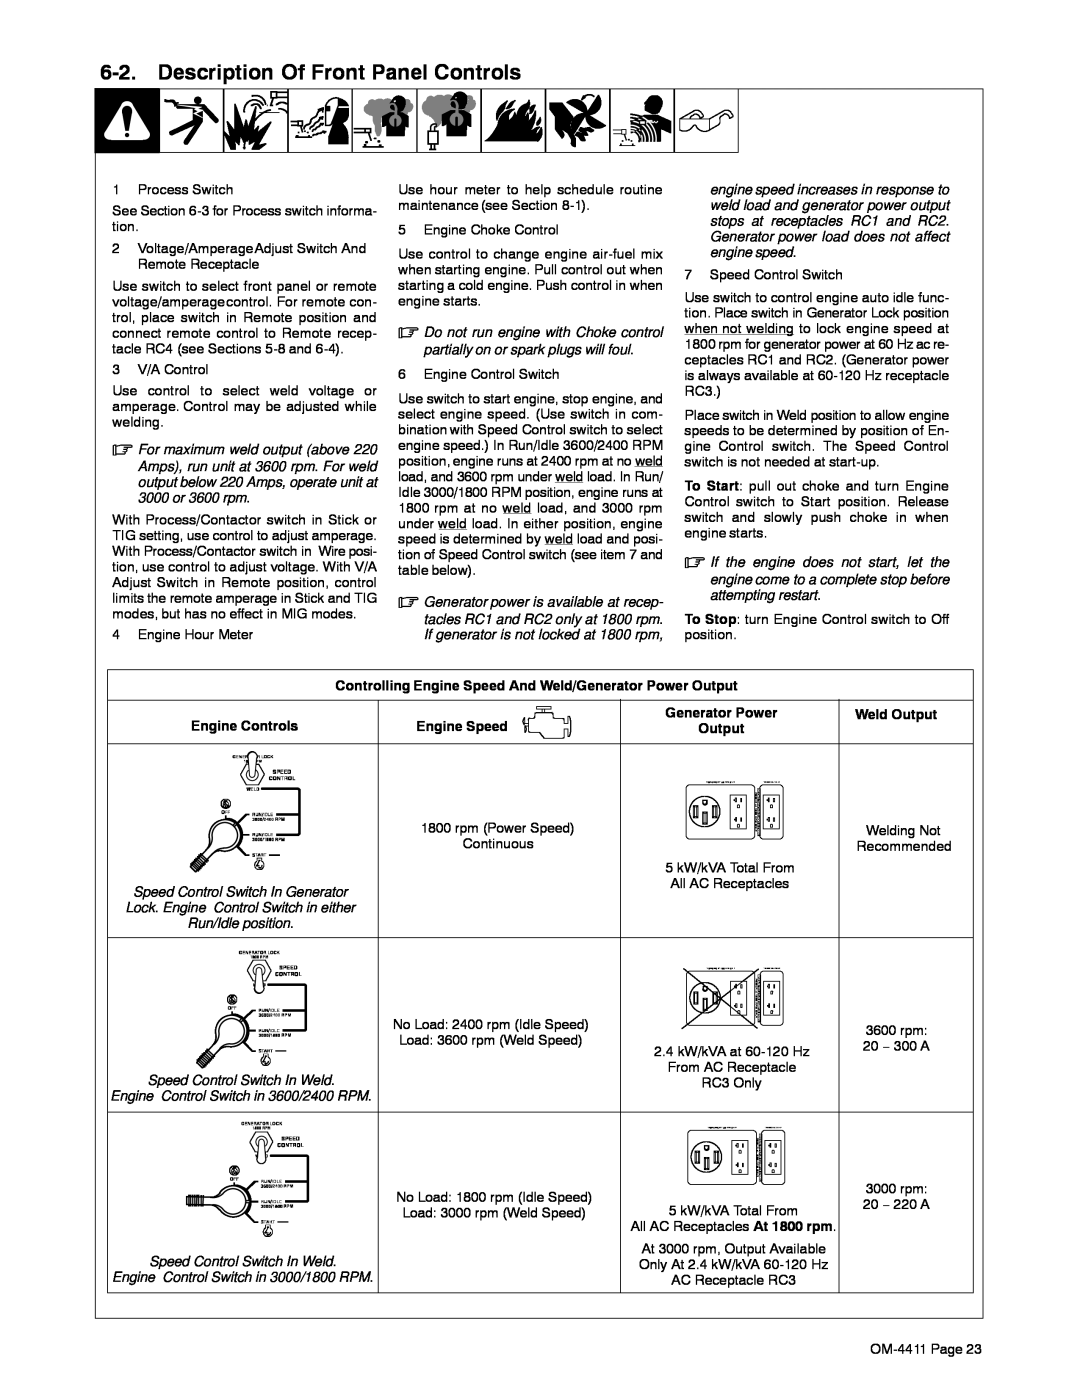 Miller Electric 301 G manual Description Of Front Panel Controls, Generator power is available at recep, Engine Controls 